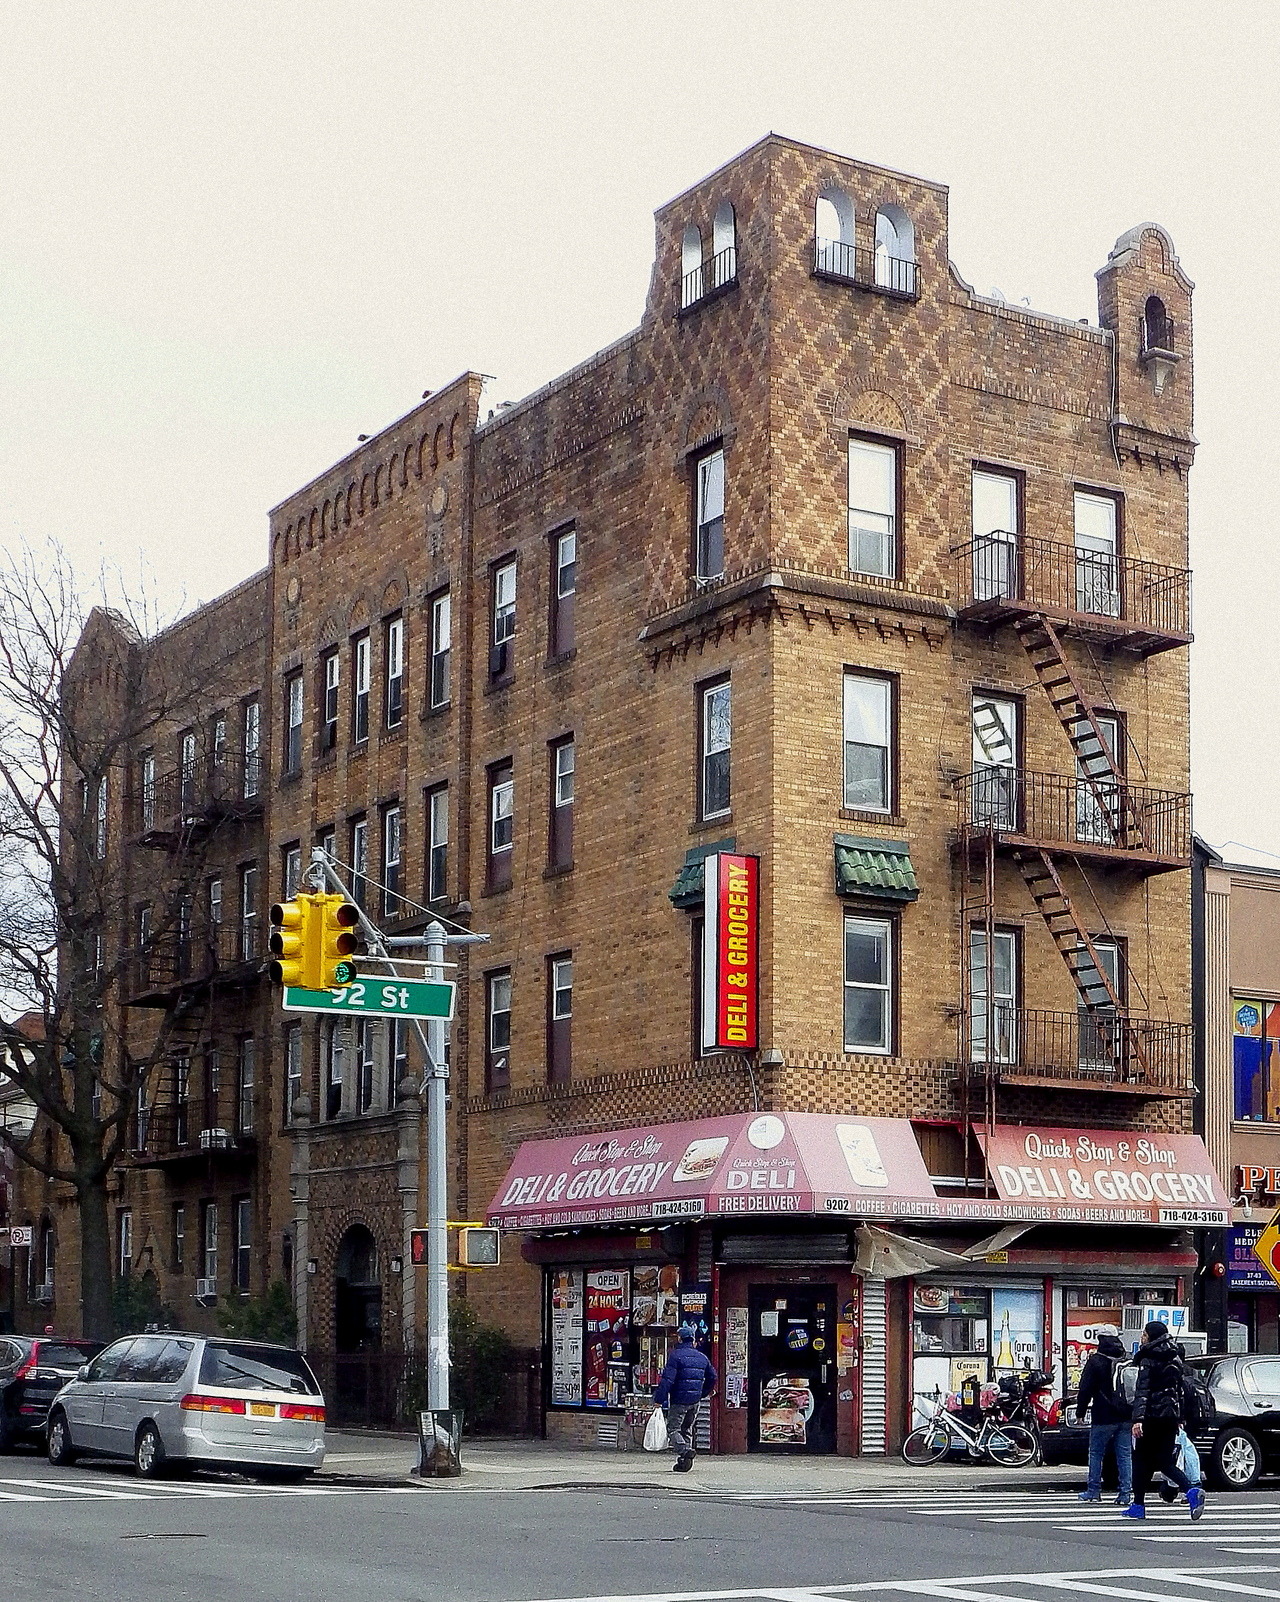 Wandering New York, An apartment house in Jackson Heights, Queens